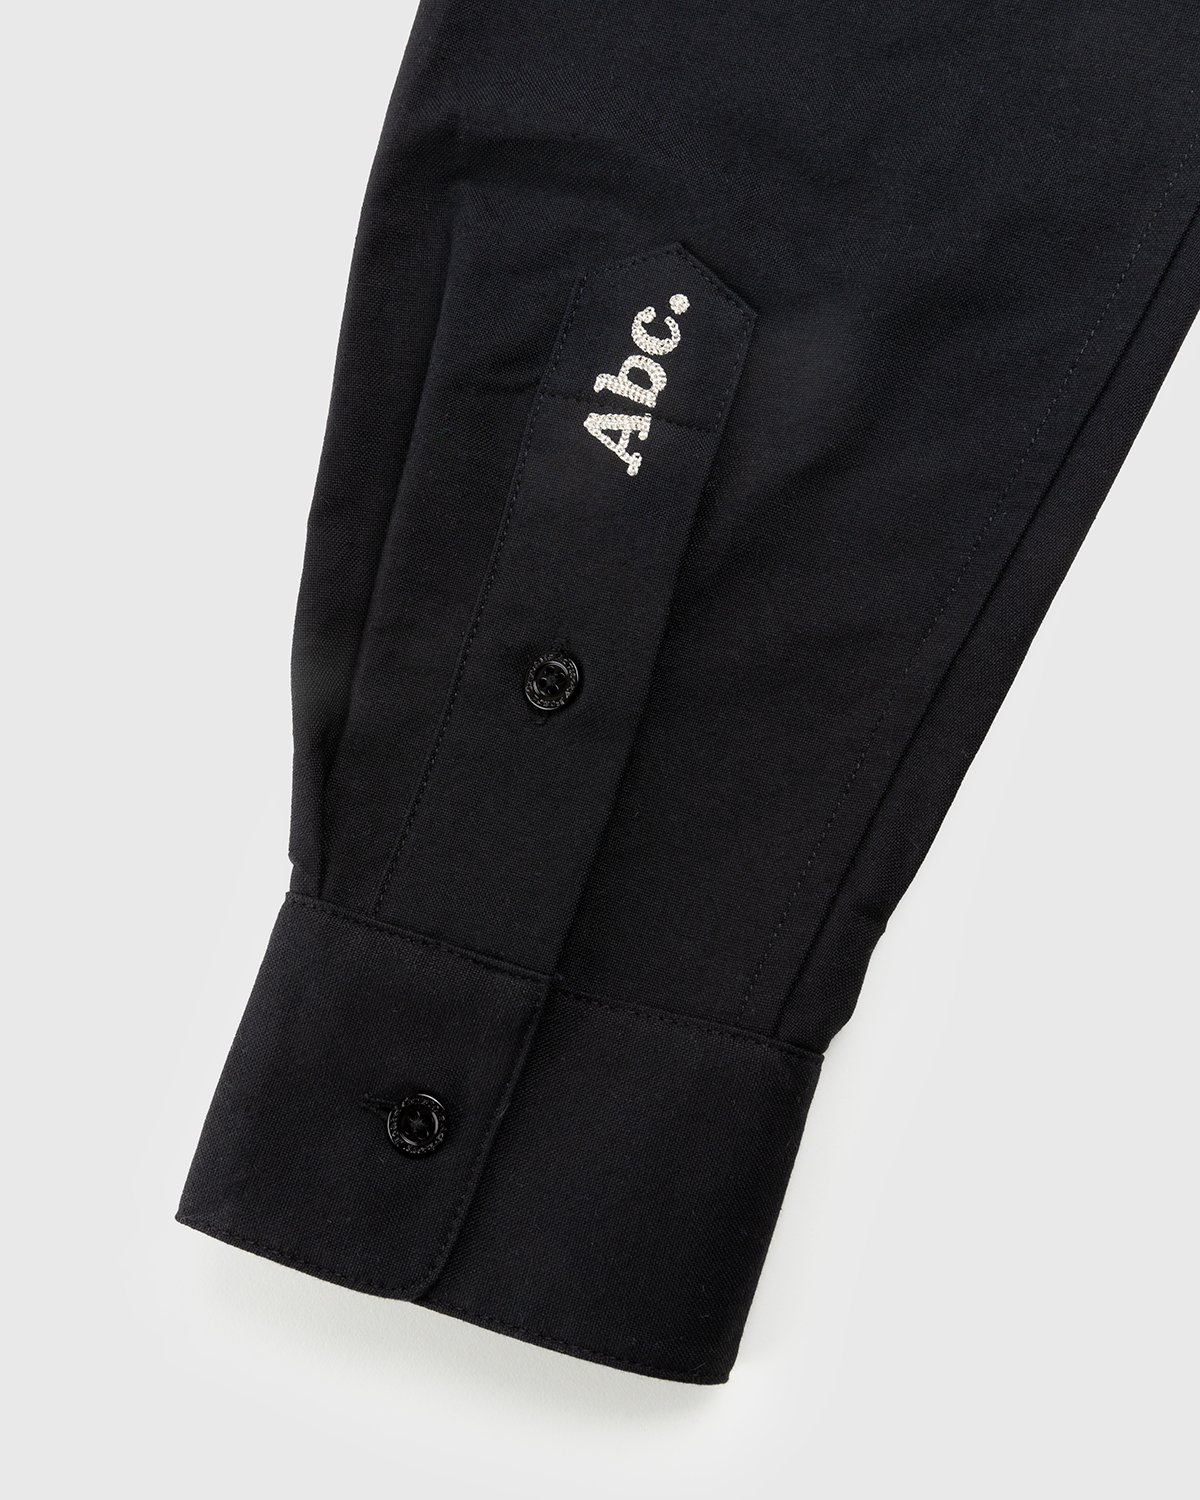 Abc. - Oxford Woven Shirt Anthracite - Clothing - Black - Image 3